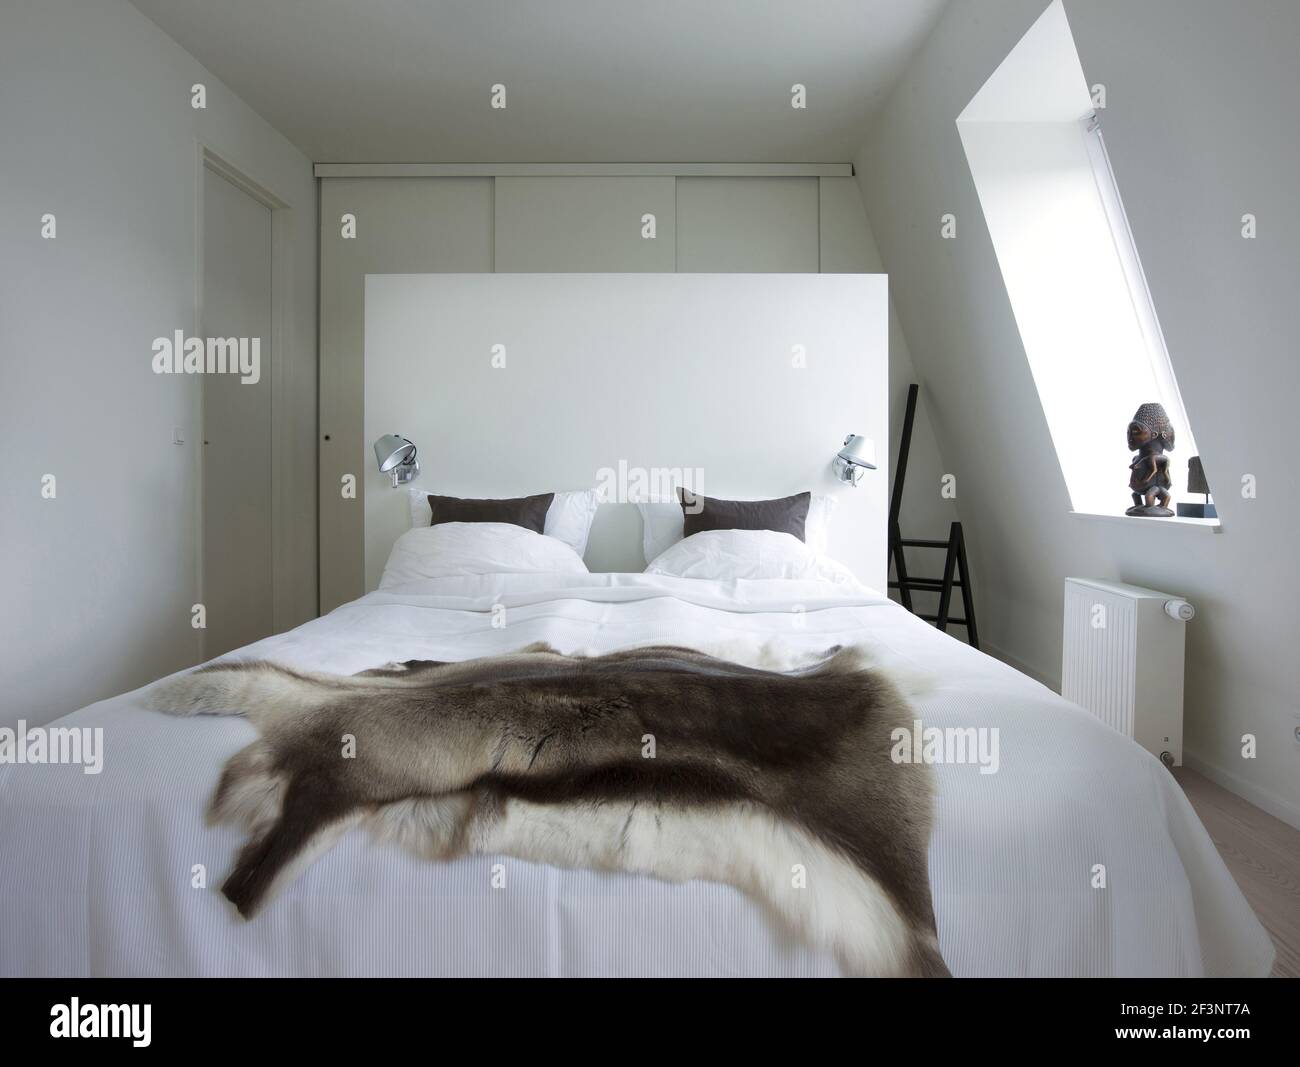 No nonsense, Modern apartment in Copenhagen. White walls and a wooden floor. Art pieces and minimalist style. A bedroom. Animal fur throw. Stock Photo